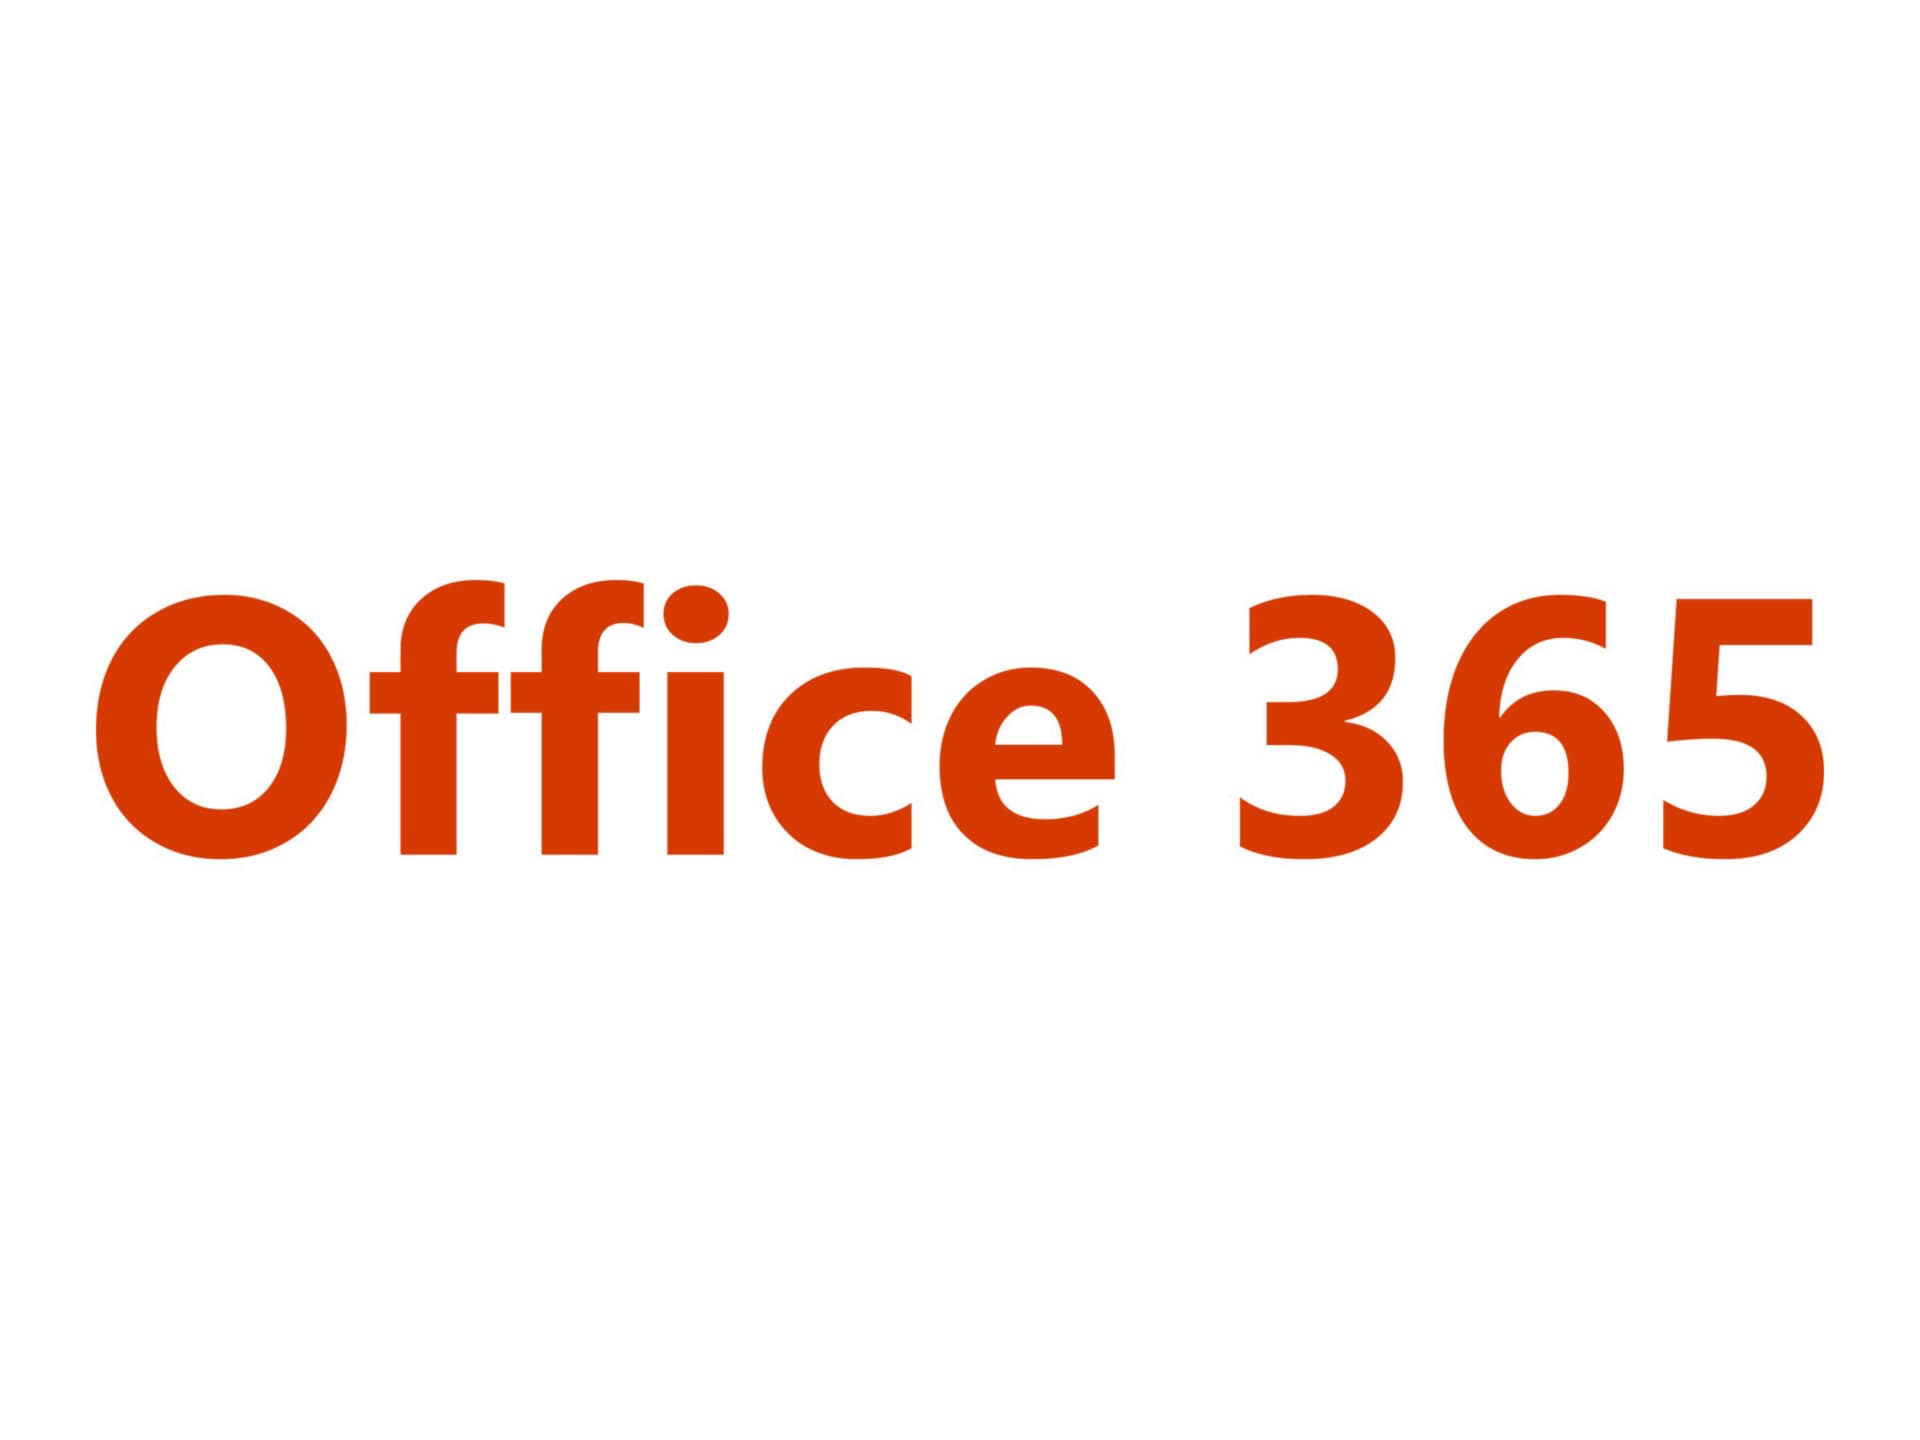 Microsoft Office 365 Advanced Threat Protection Plan 2 - subscription license (1 month) - 1 user